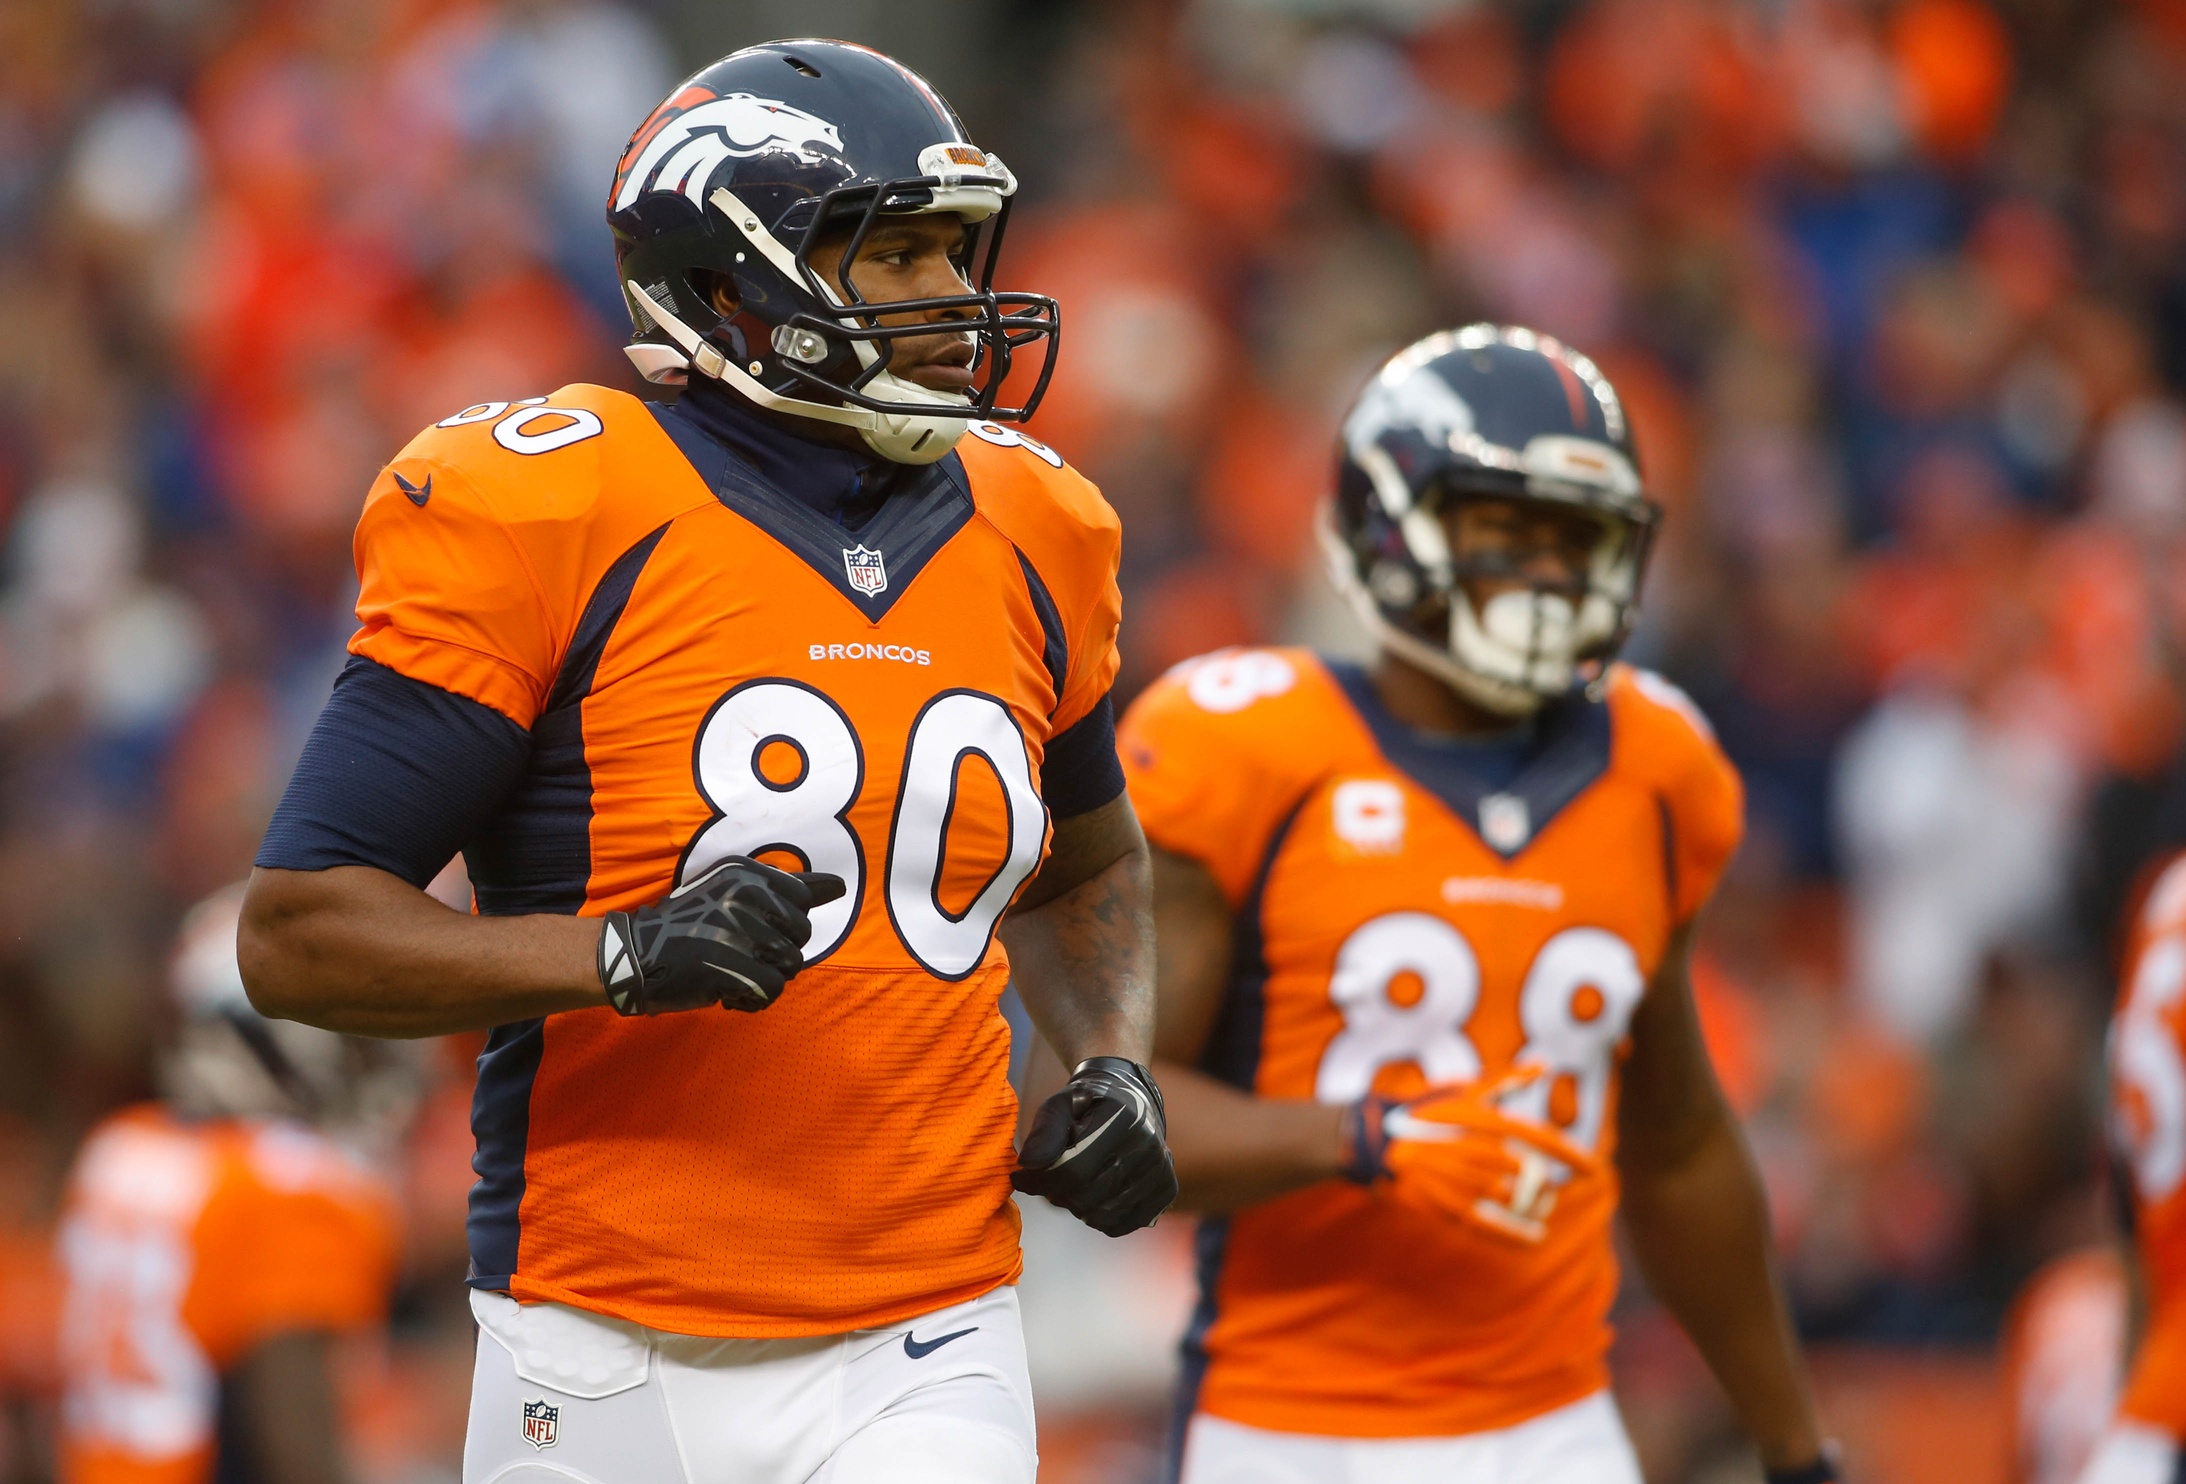 Courtesy of USA Today: How will the loss of Julius Thomas impact the Broncos?